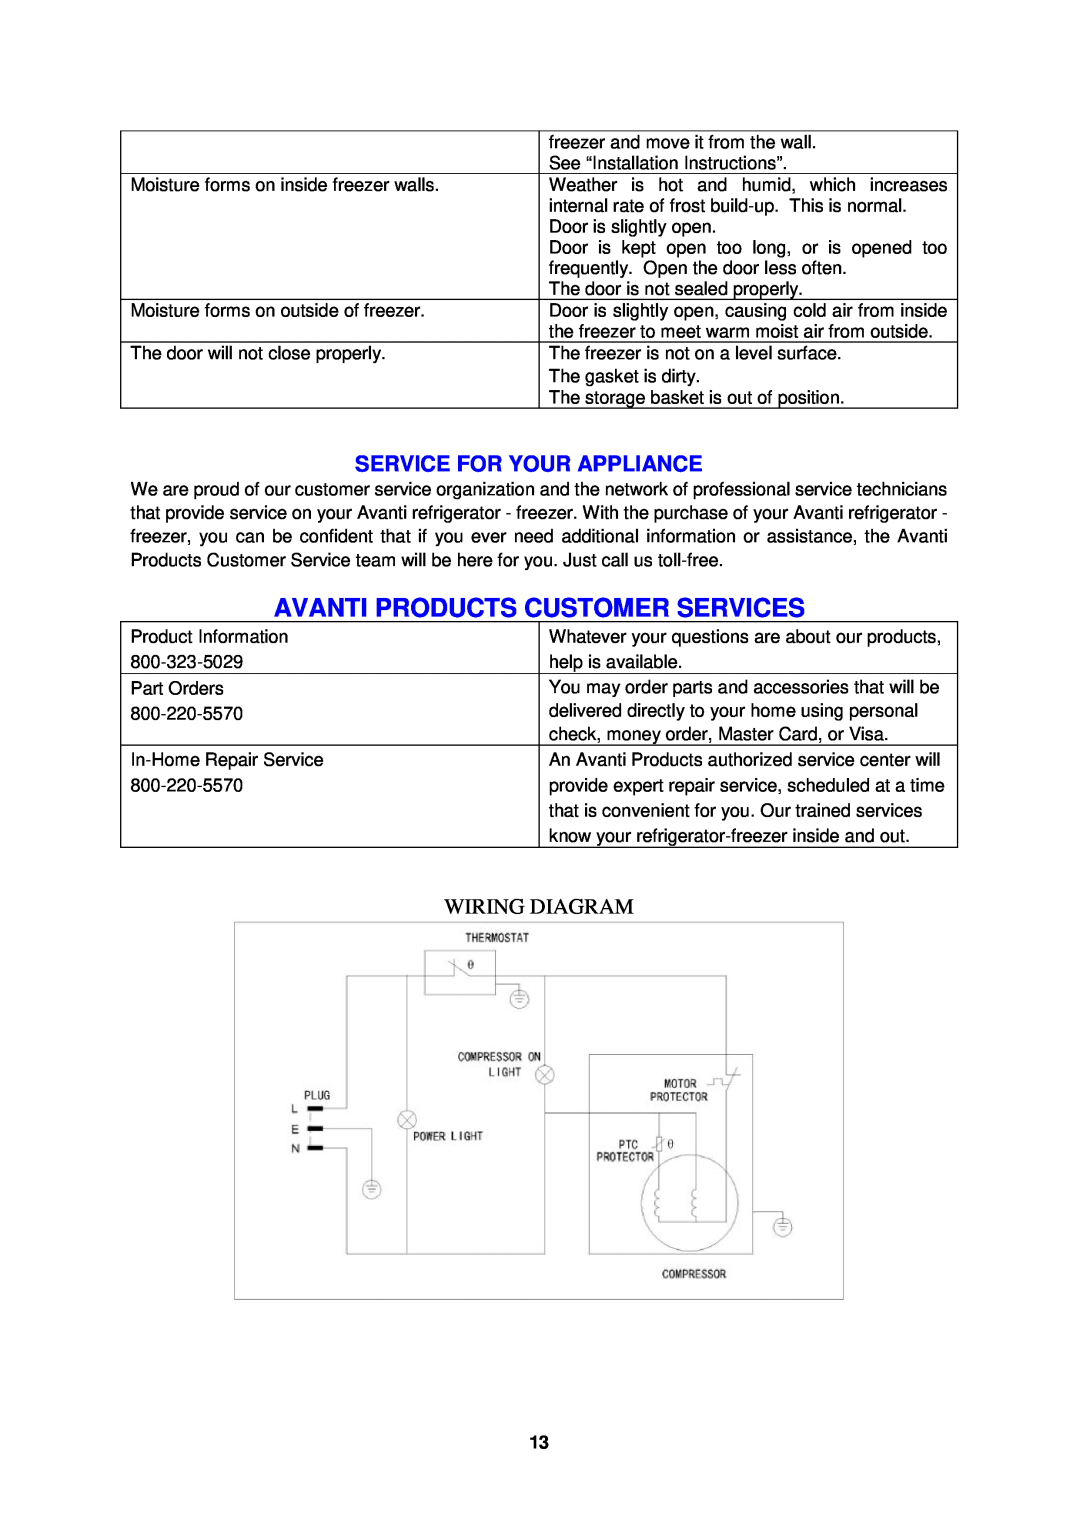 Avanti cf524cg instruction manual Service For Your Appliance, Avanti Products Customer Services, Wiring Diagram 